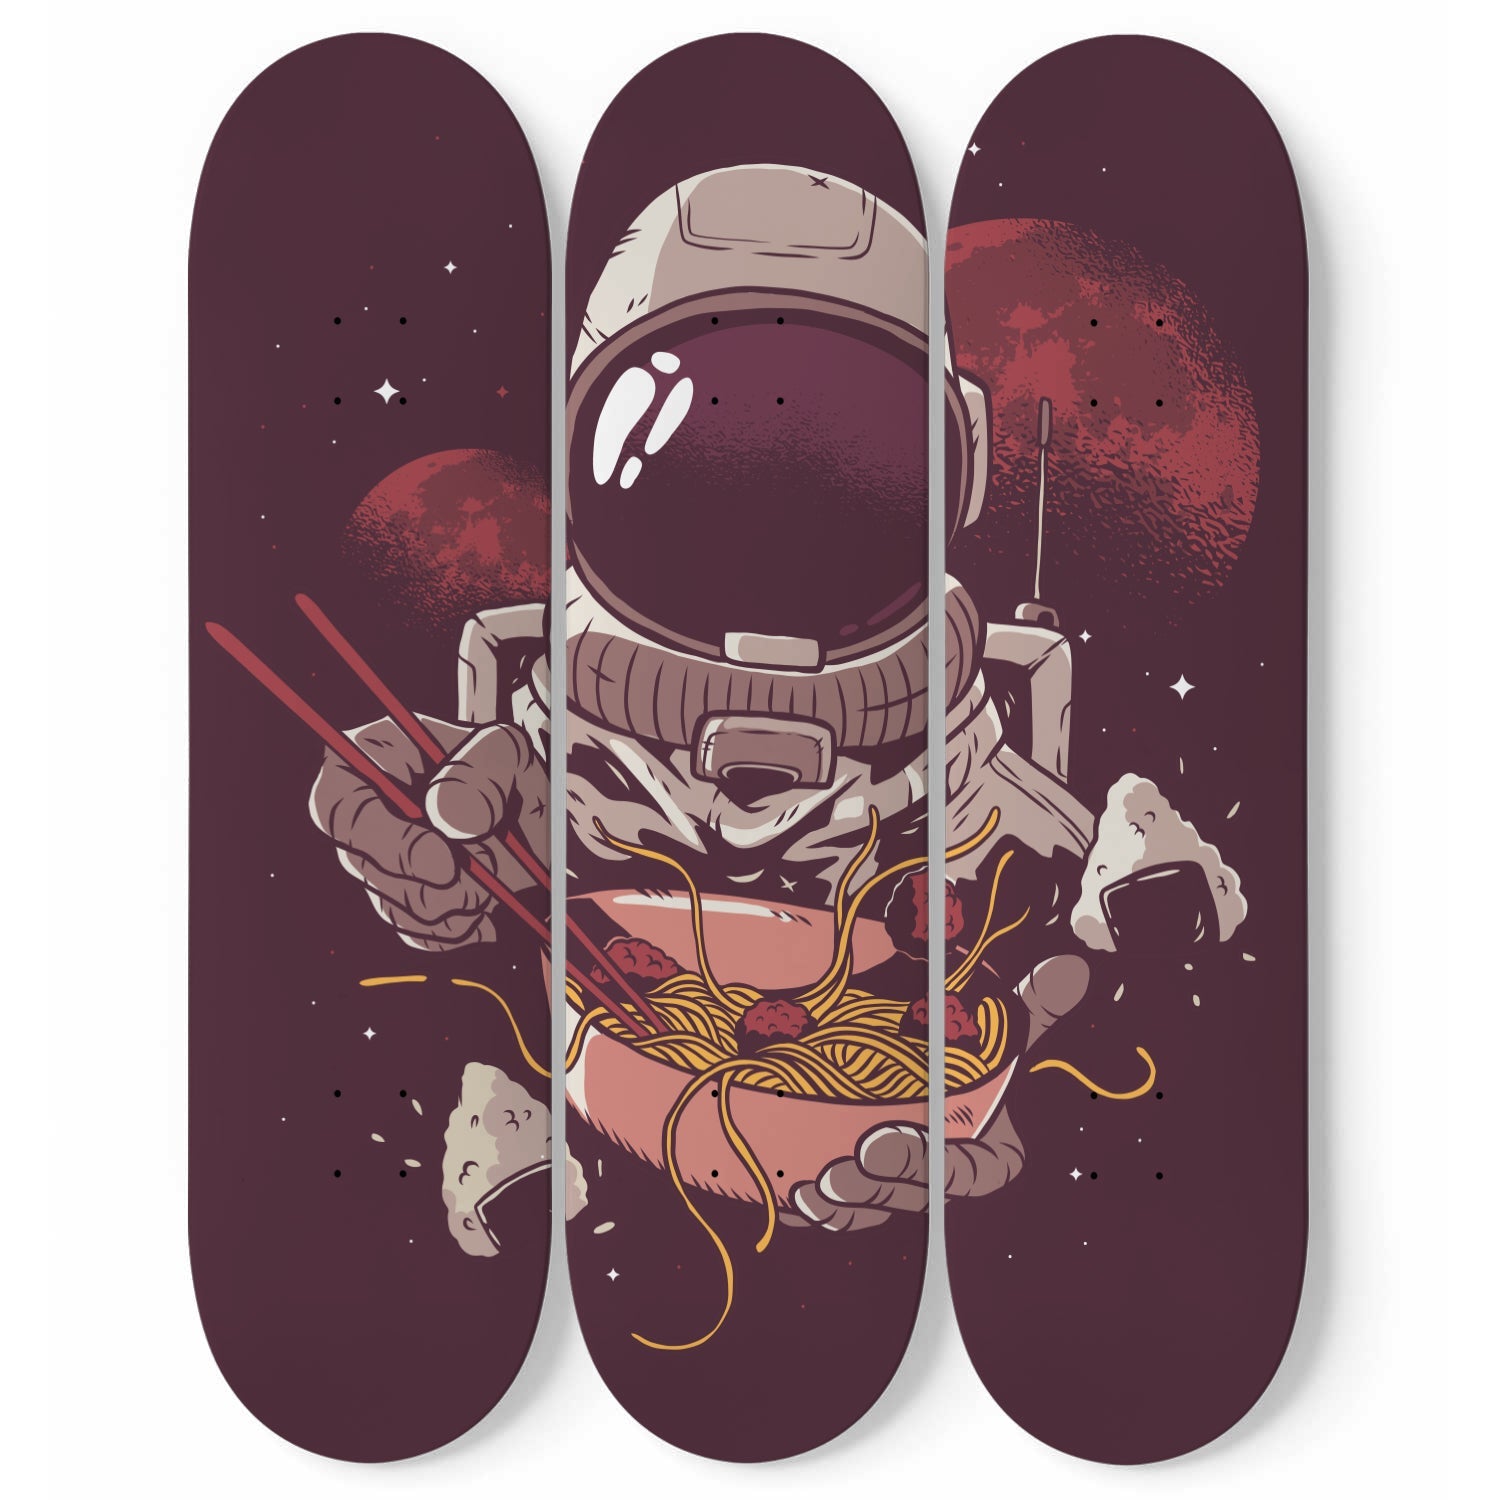 Space Odyssey #15.0 - Skater Wall